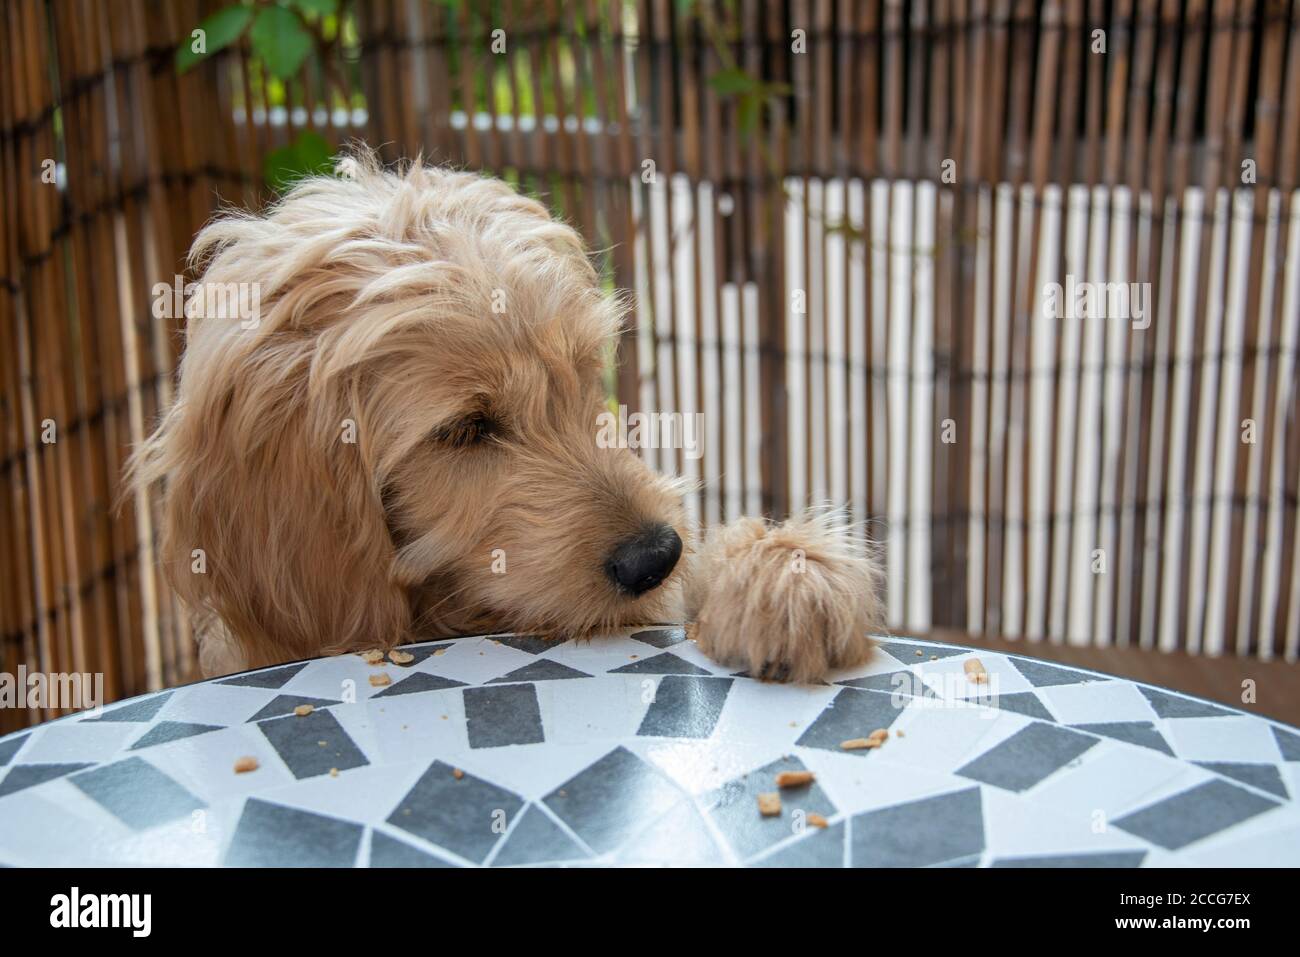 Mini Goldendoodle, cross between miniature poodle and golden retriever, steals a biscuit from the table. Stock Photo